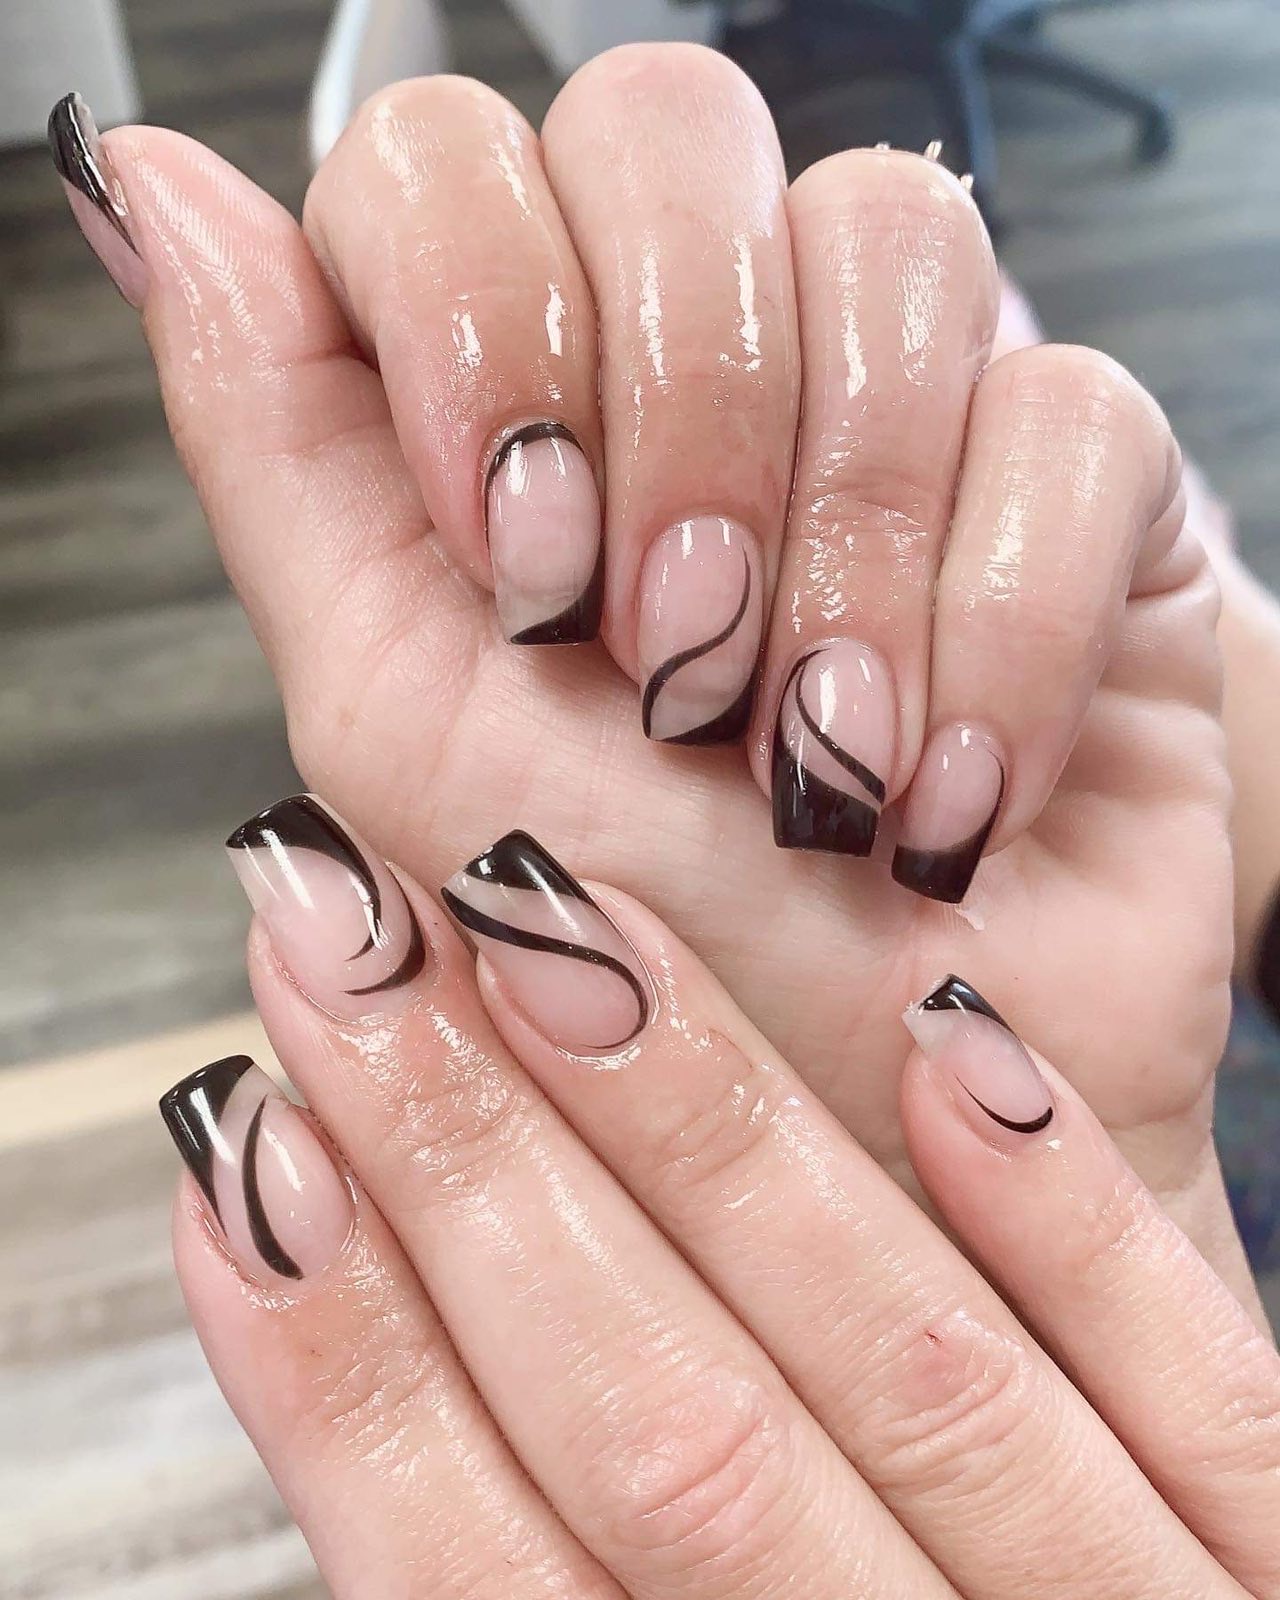 Canada Nail Supplies Inc. - Beautiful set by @eloriennebeautyco using YN  Precision Gel Applicator Rose Quartz Available at CANADANAILSUPPLIES.COM  #canadanailsupplies #nailsupplies #nailartsupplies #nailartsupply  #nailsupply #valentinenails #youngnails ...